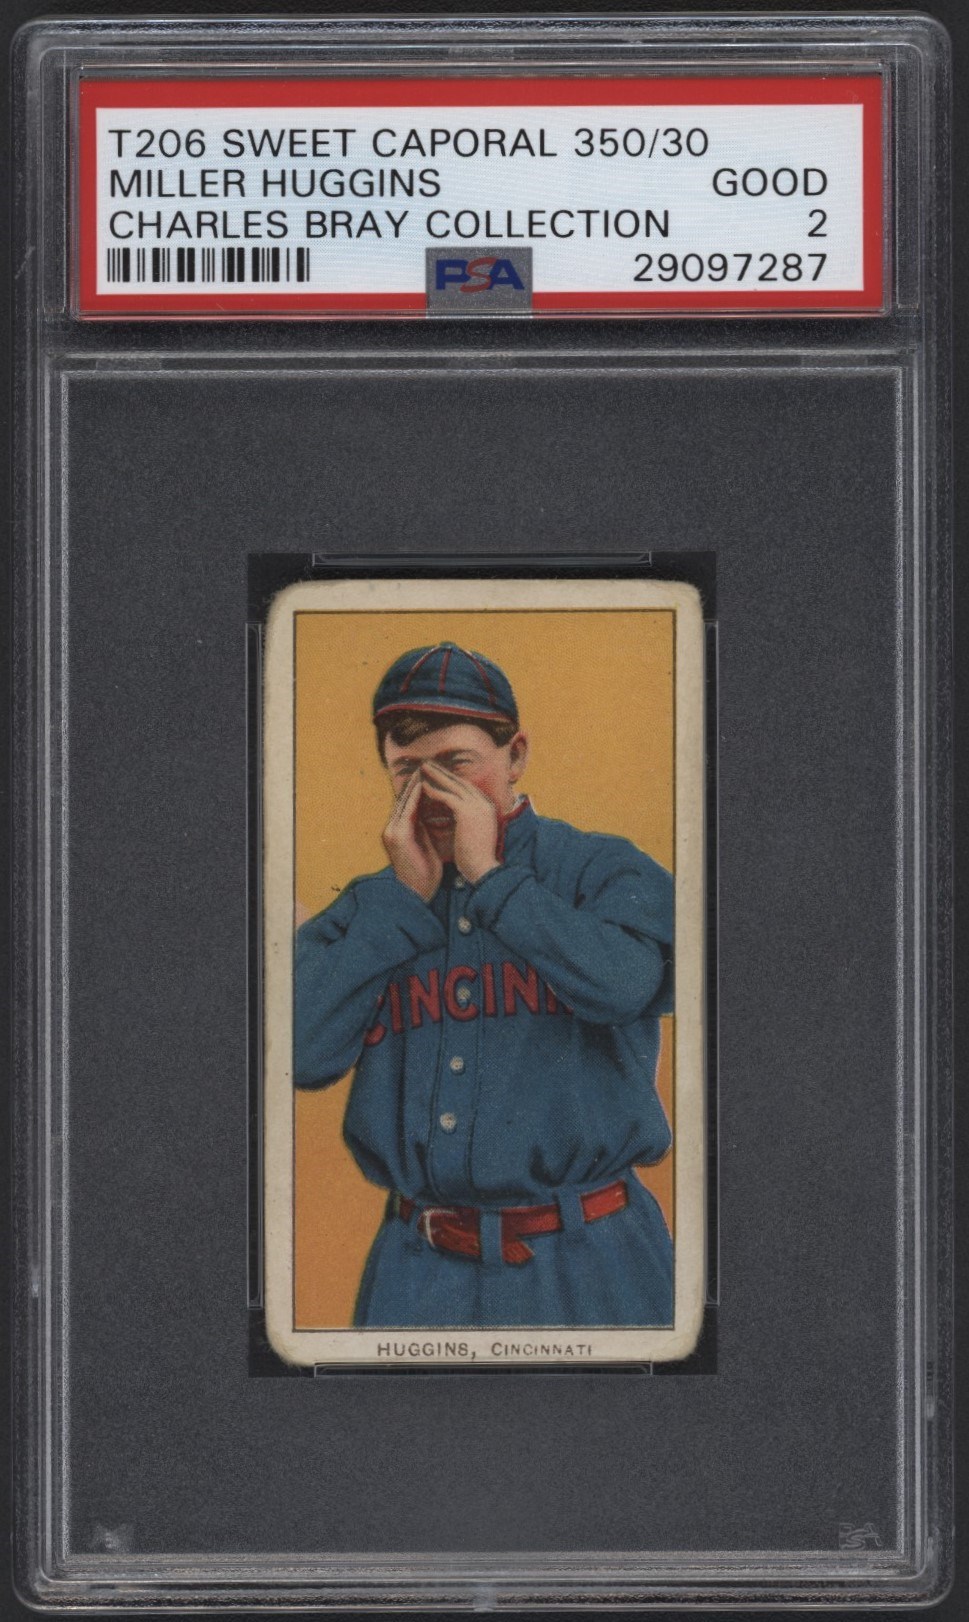 Baseball and Trading Cards - T206 Sweet Caporal 350/30 Miller Huggins PSA 2 From the Charles Bray Collection.